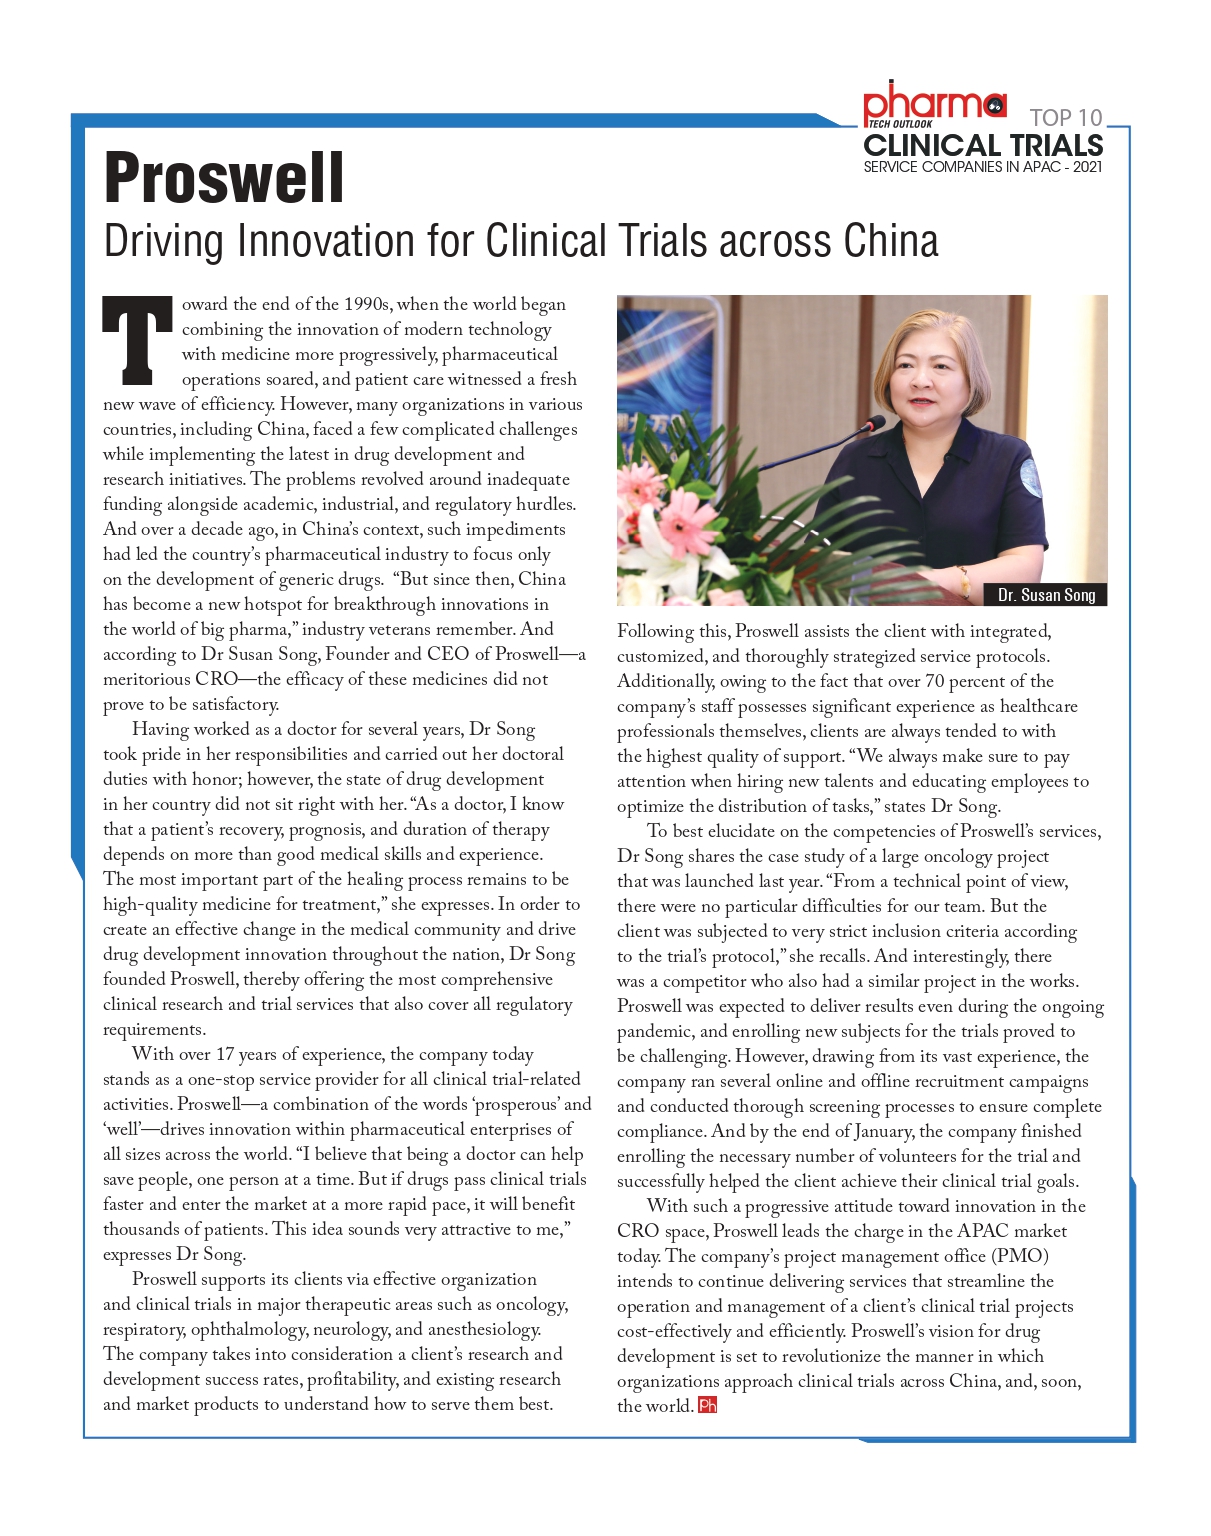 Recognized as Top 10 Clinical Trials Service Companies in APAC